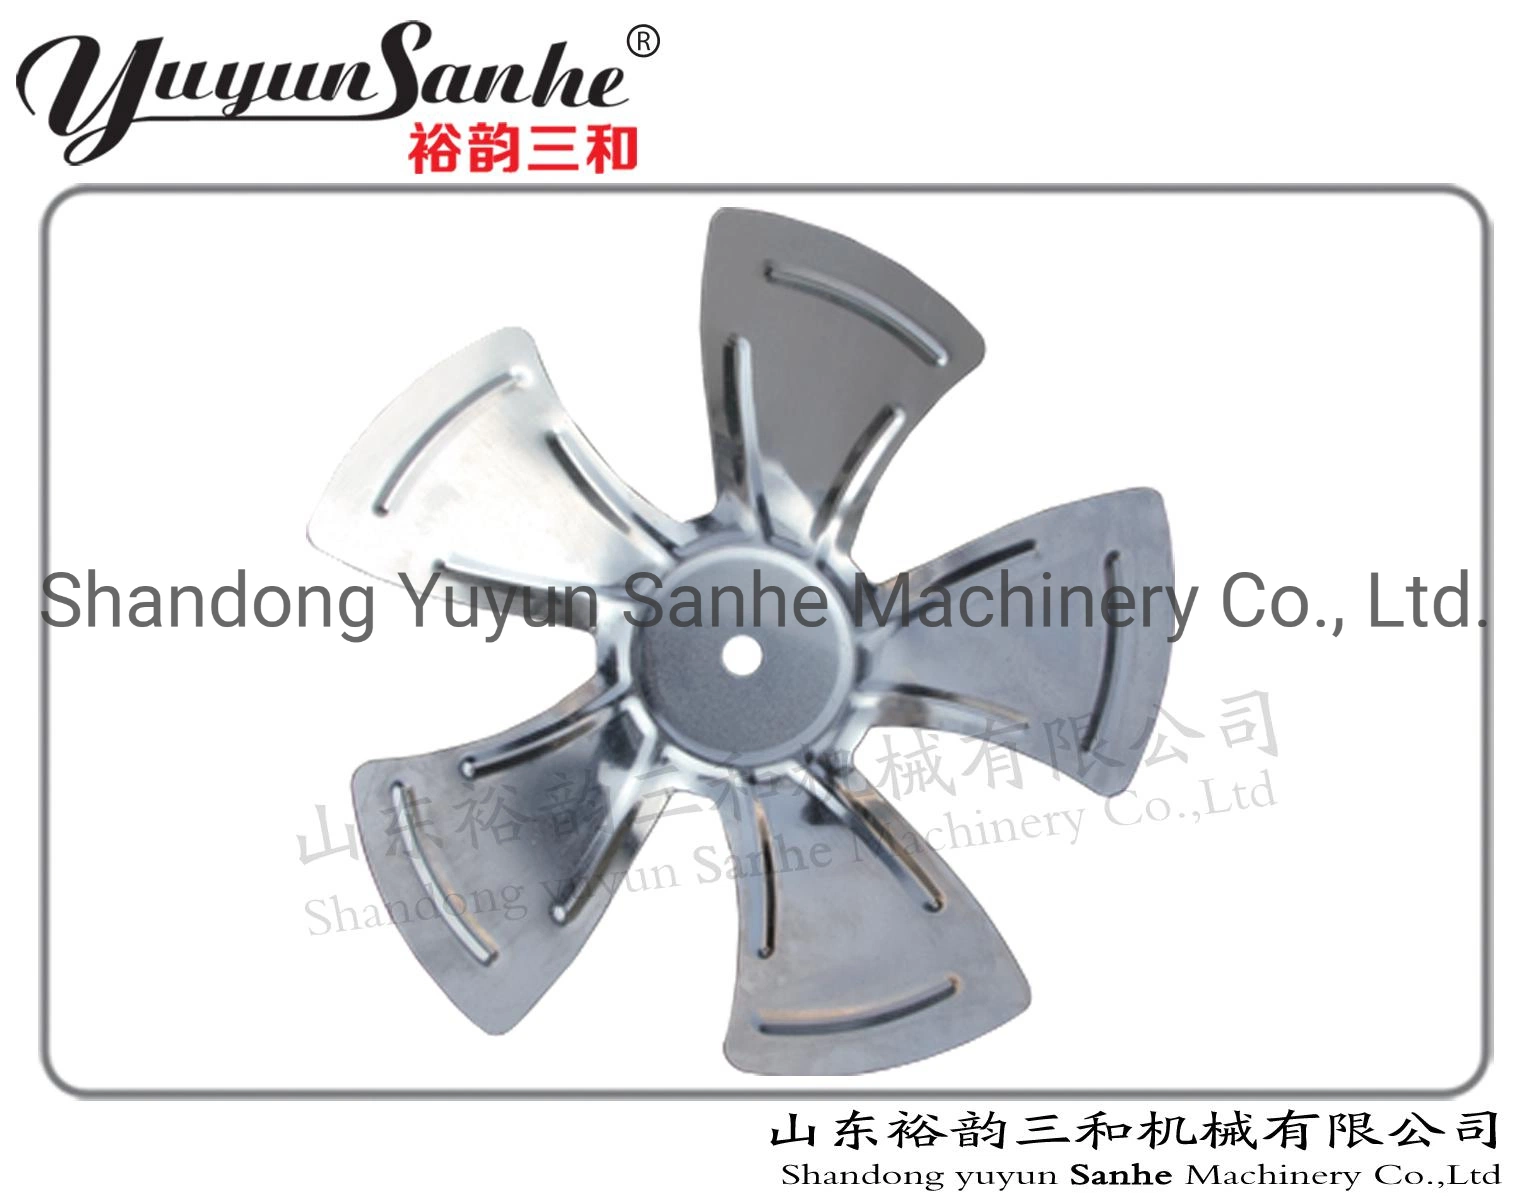 Yuyun Sanhe Ceiling Mount Air Circulation Fan Agriculture Greenhouse Equipment Air Cooling Ventilation Climate Control System Low Noise